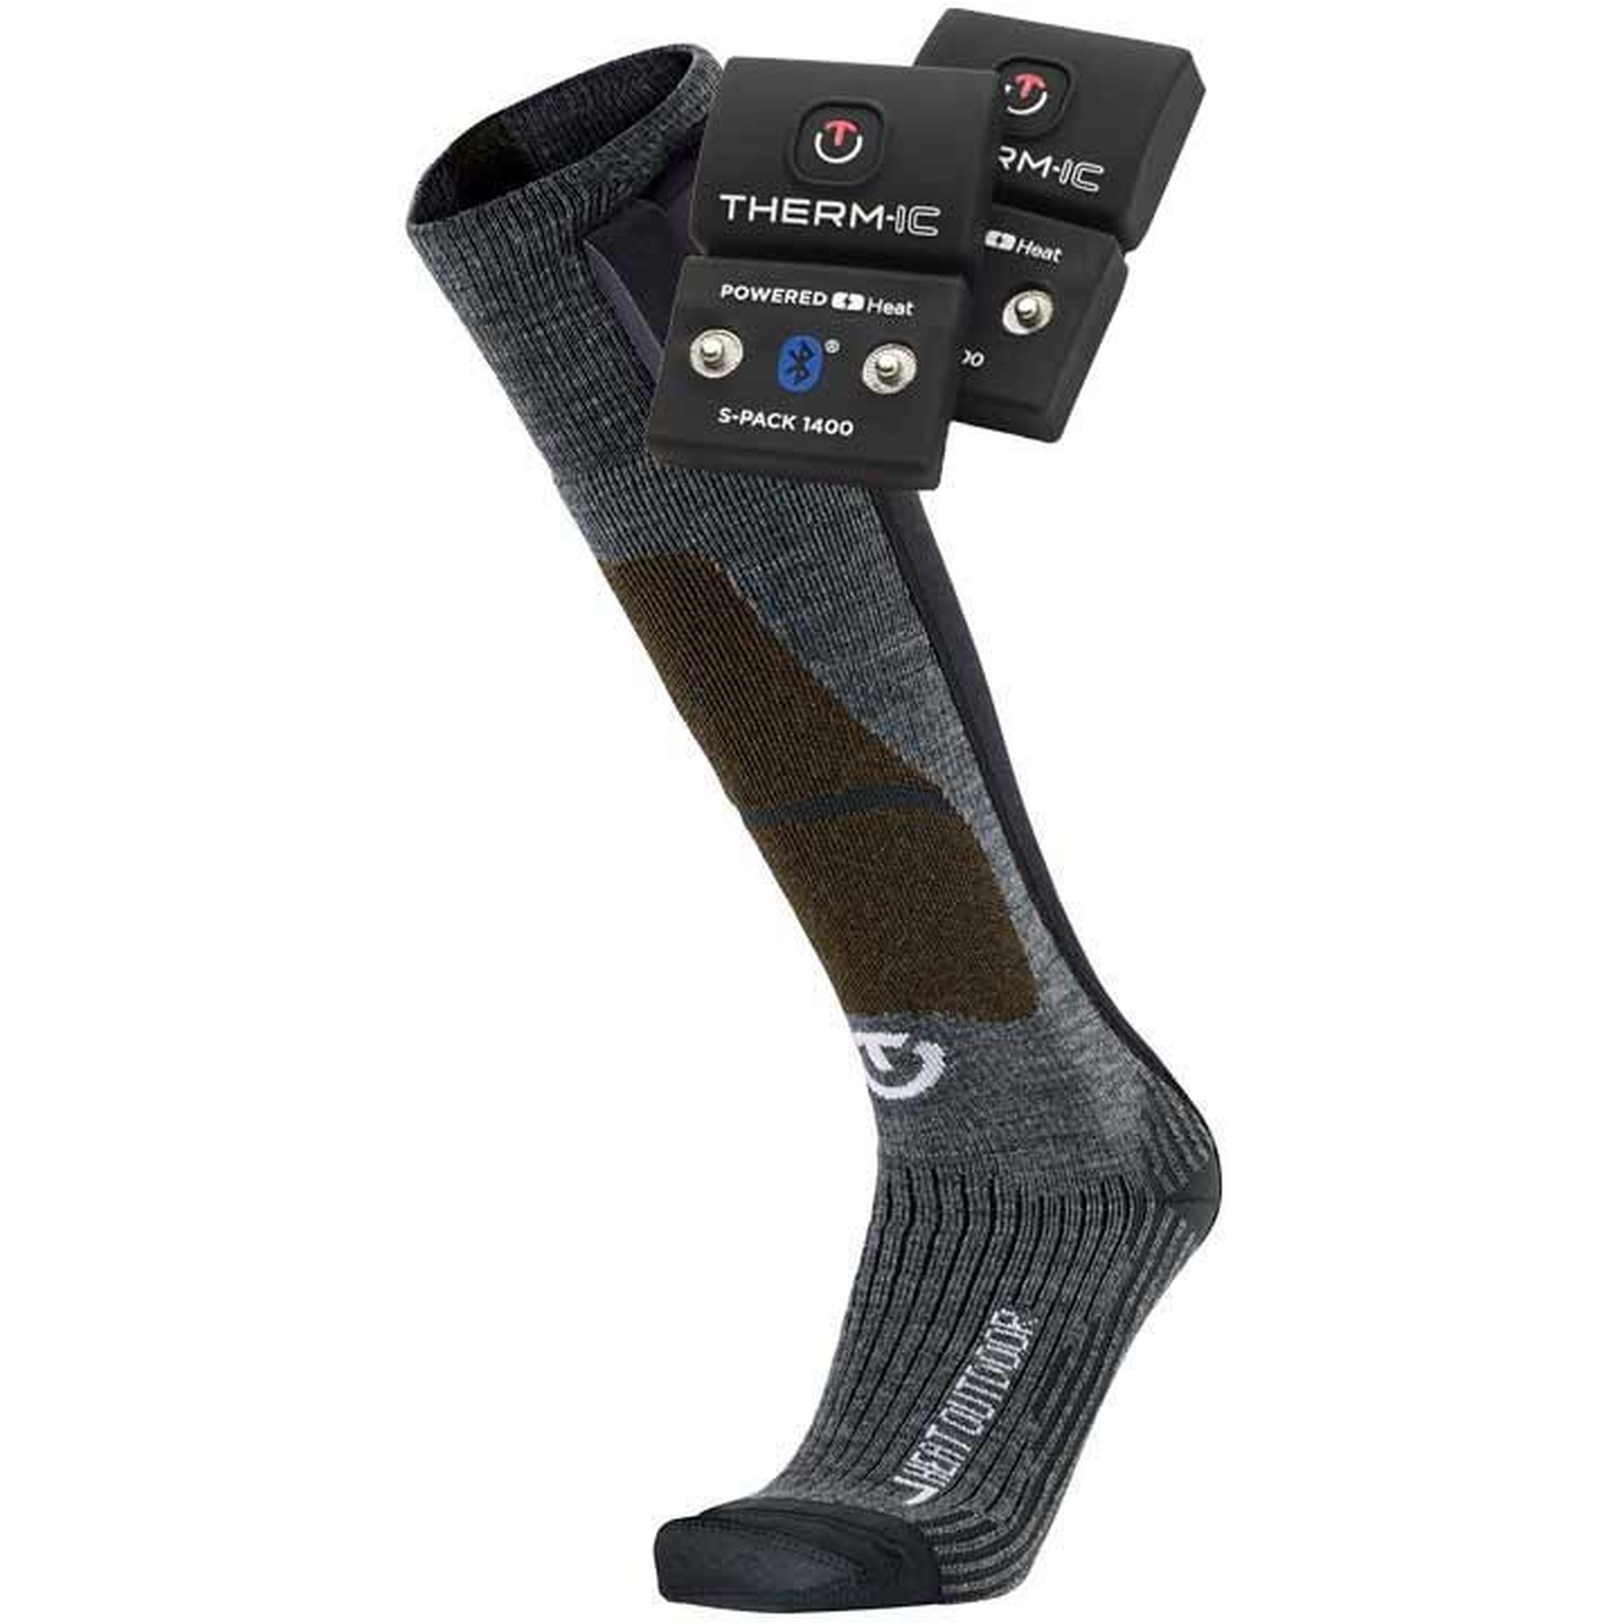 Picture of therm-ic Powersock Set - Heat Fusion Outdoor Heatable Socks + S-Pack 1400 B Battery - grey